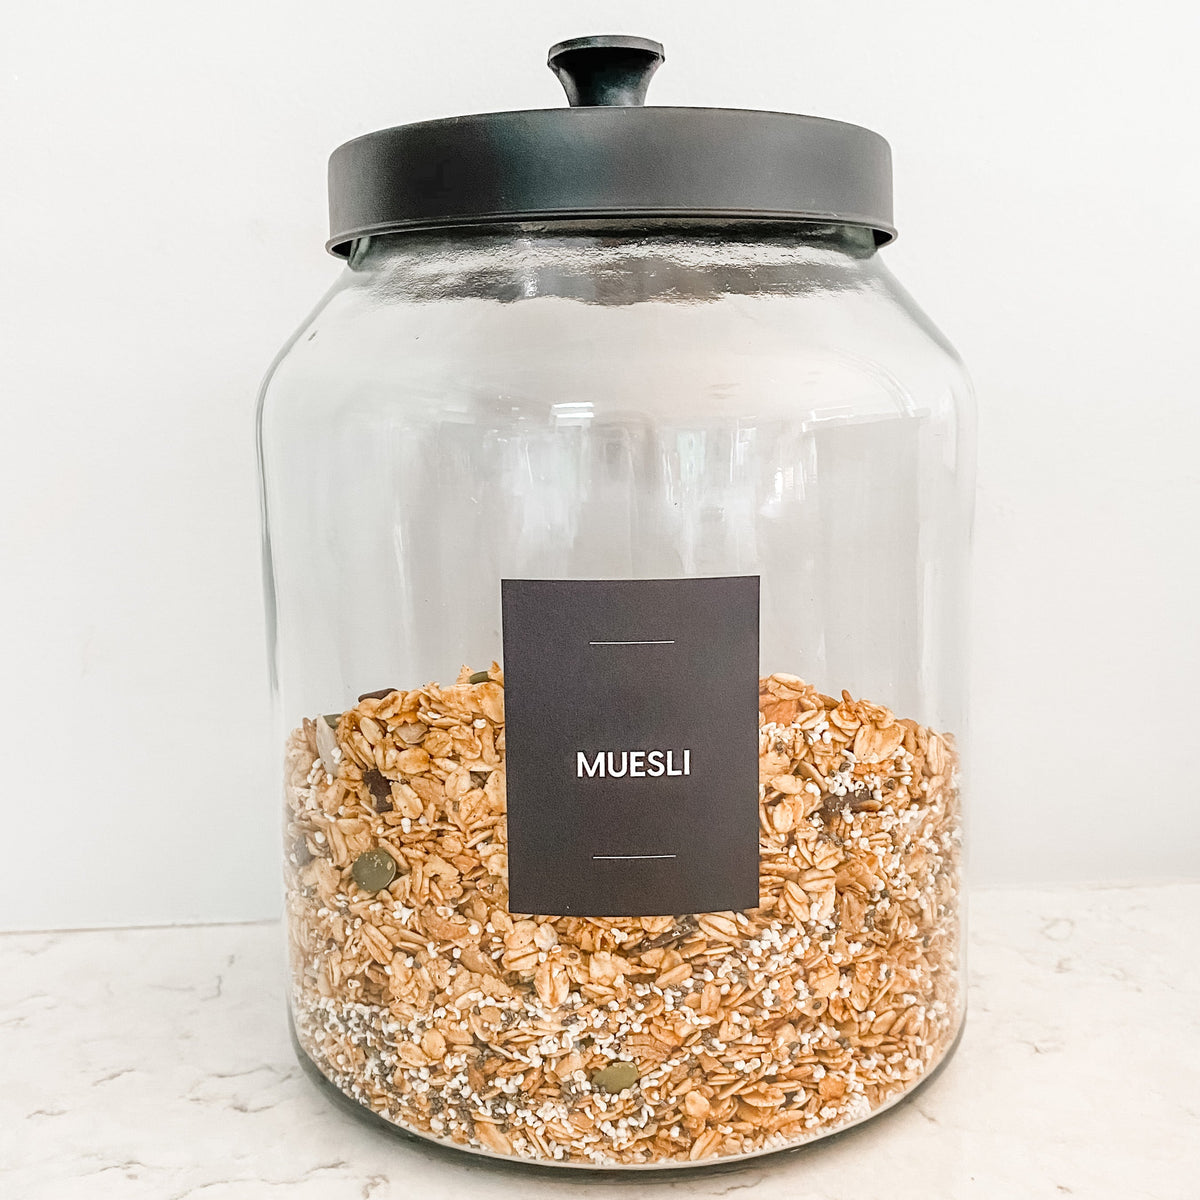 Cosmo Glass Jars with Black Lid